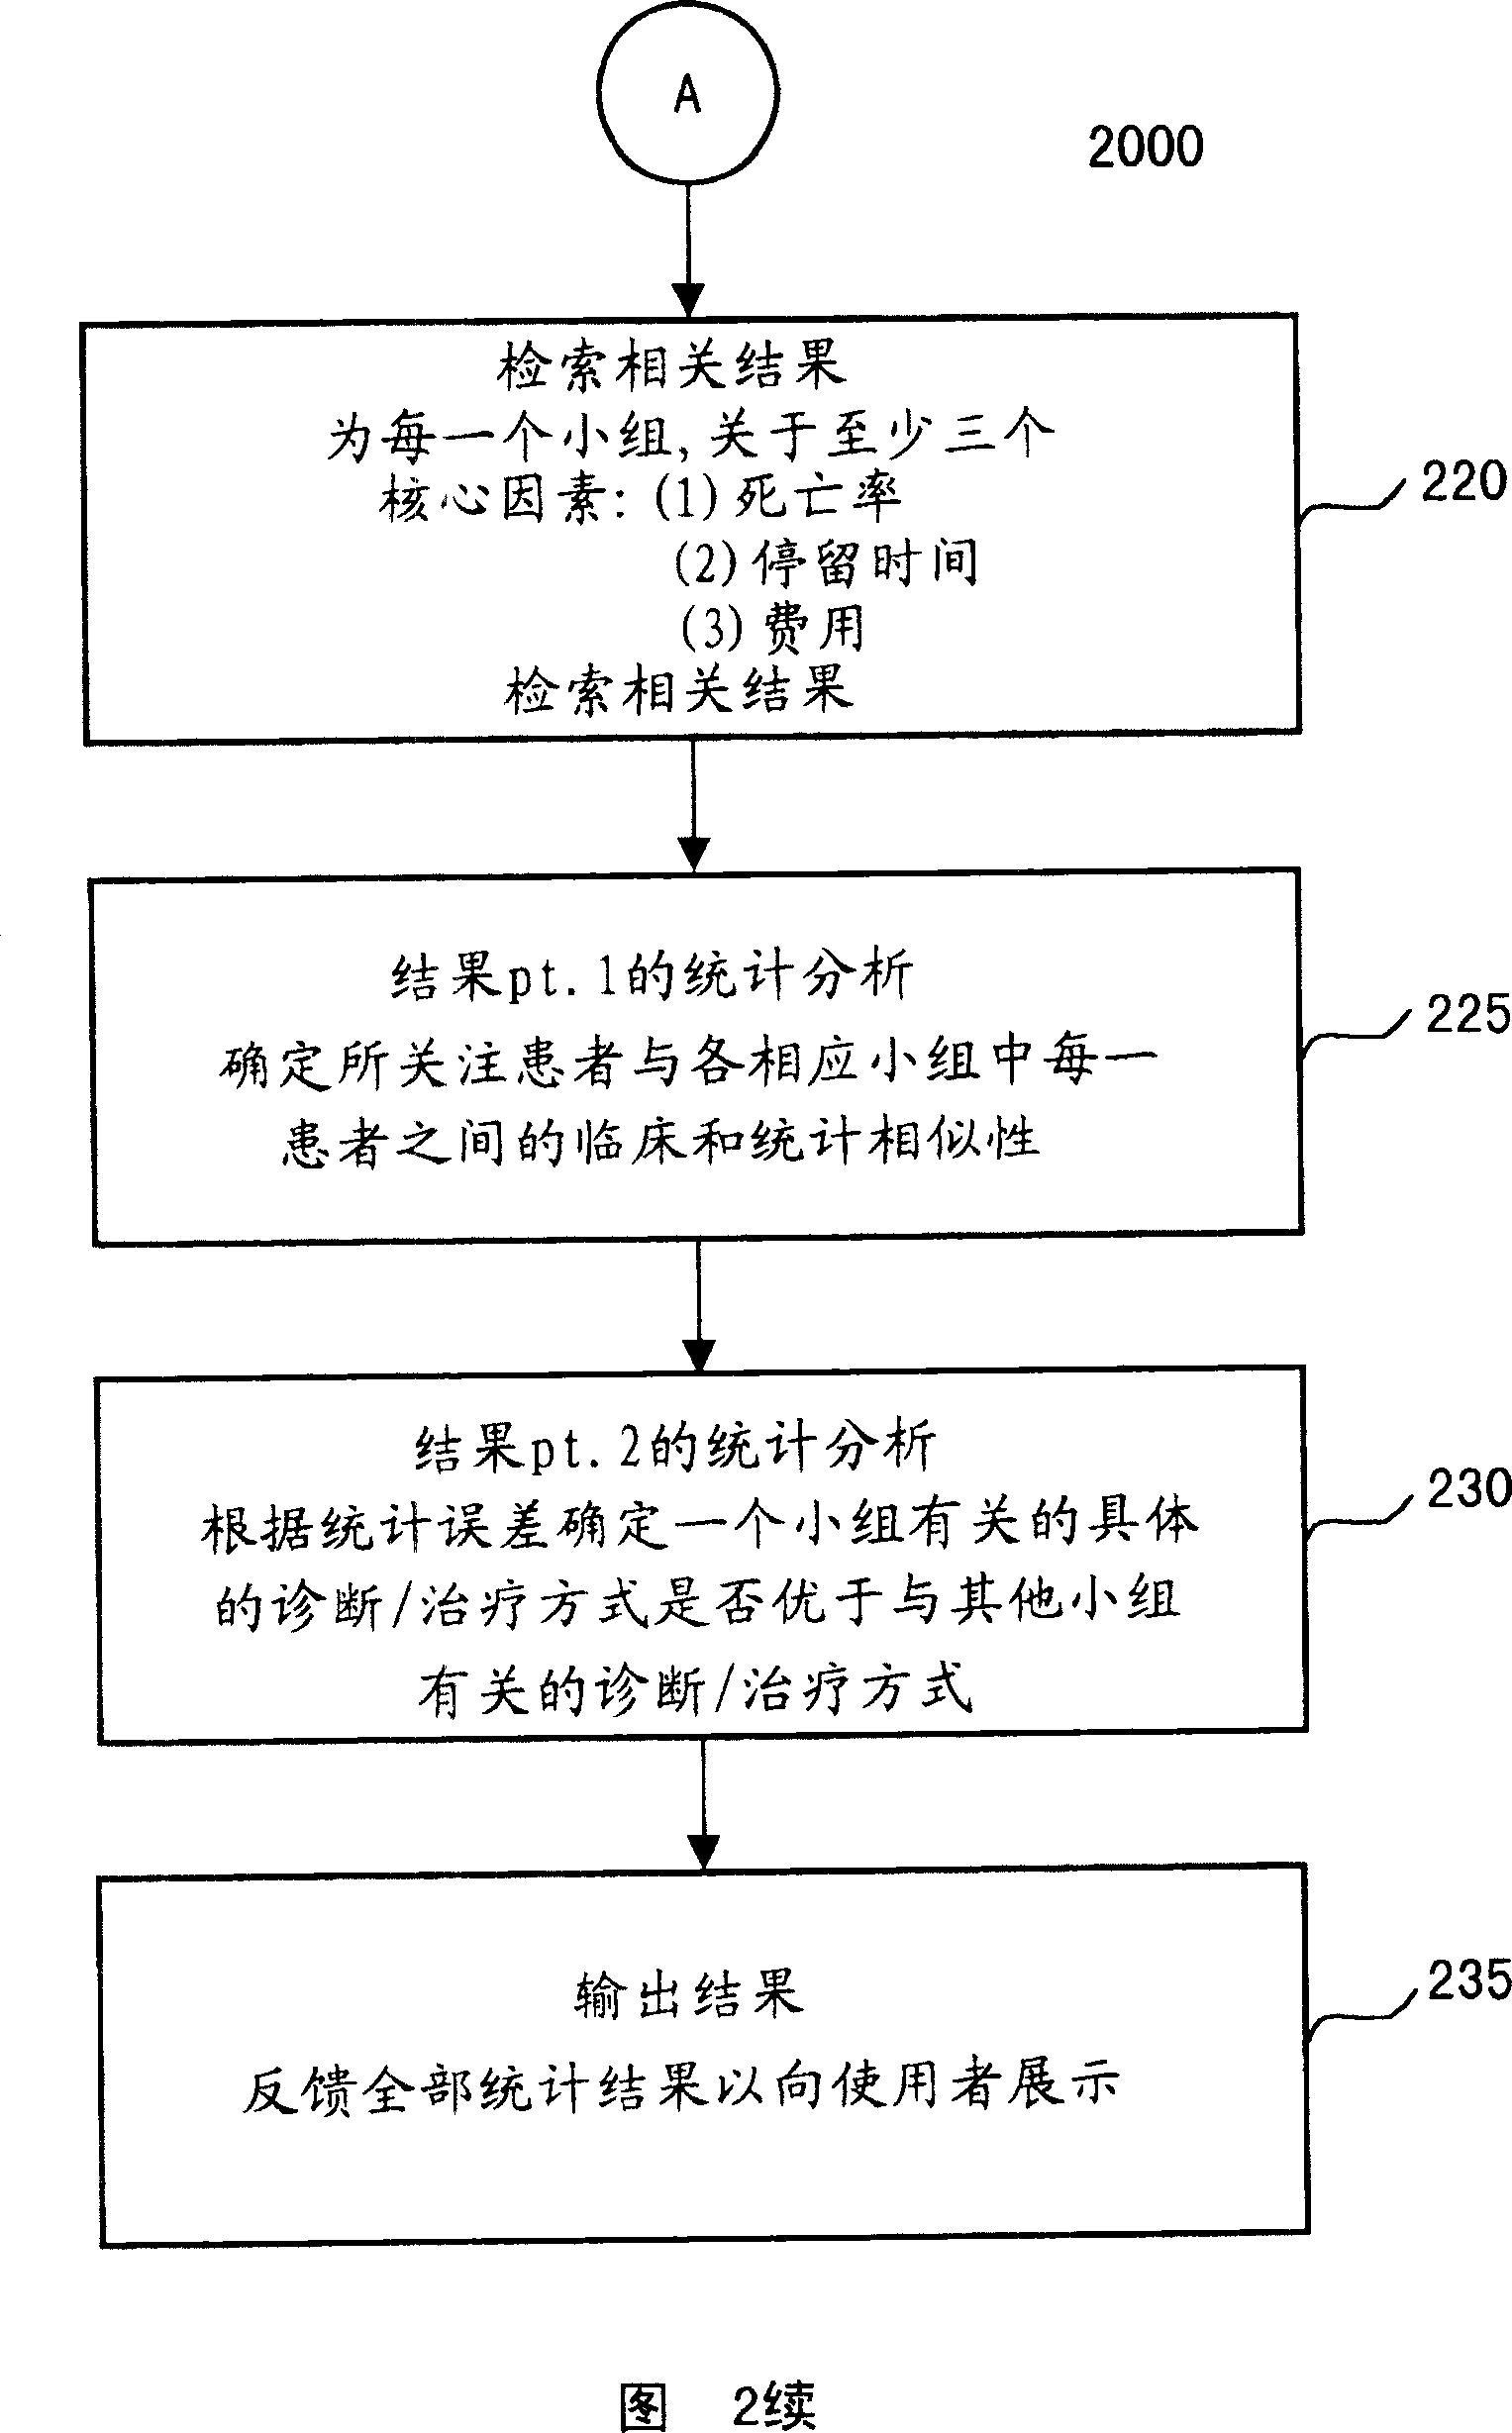 Method and system for providing medical decision support